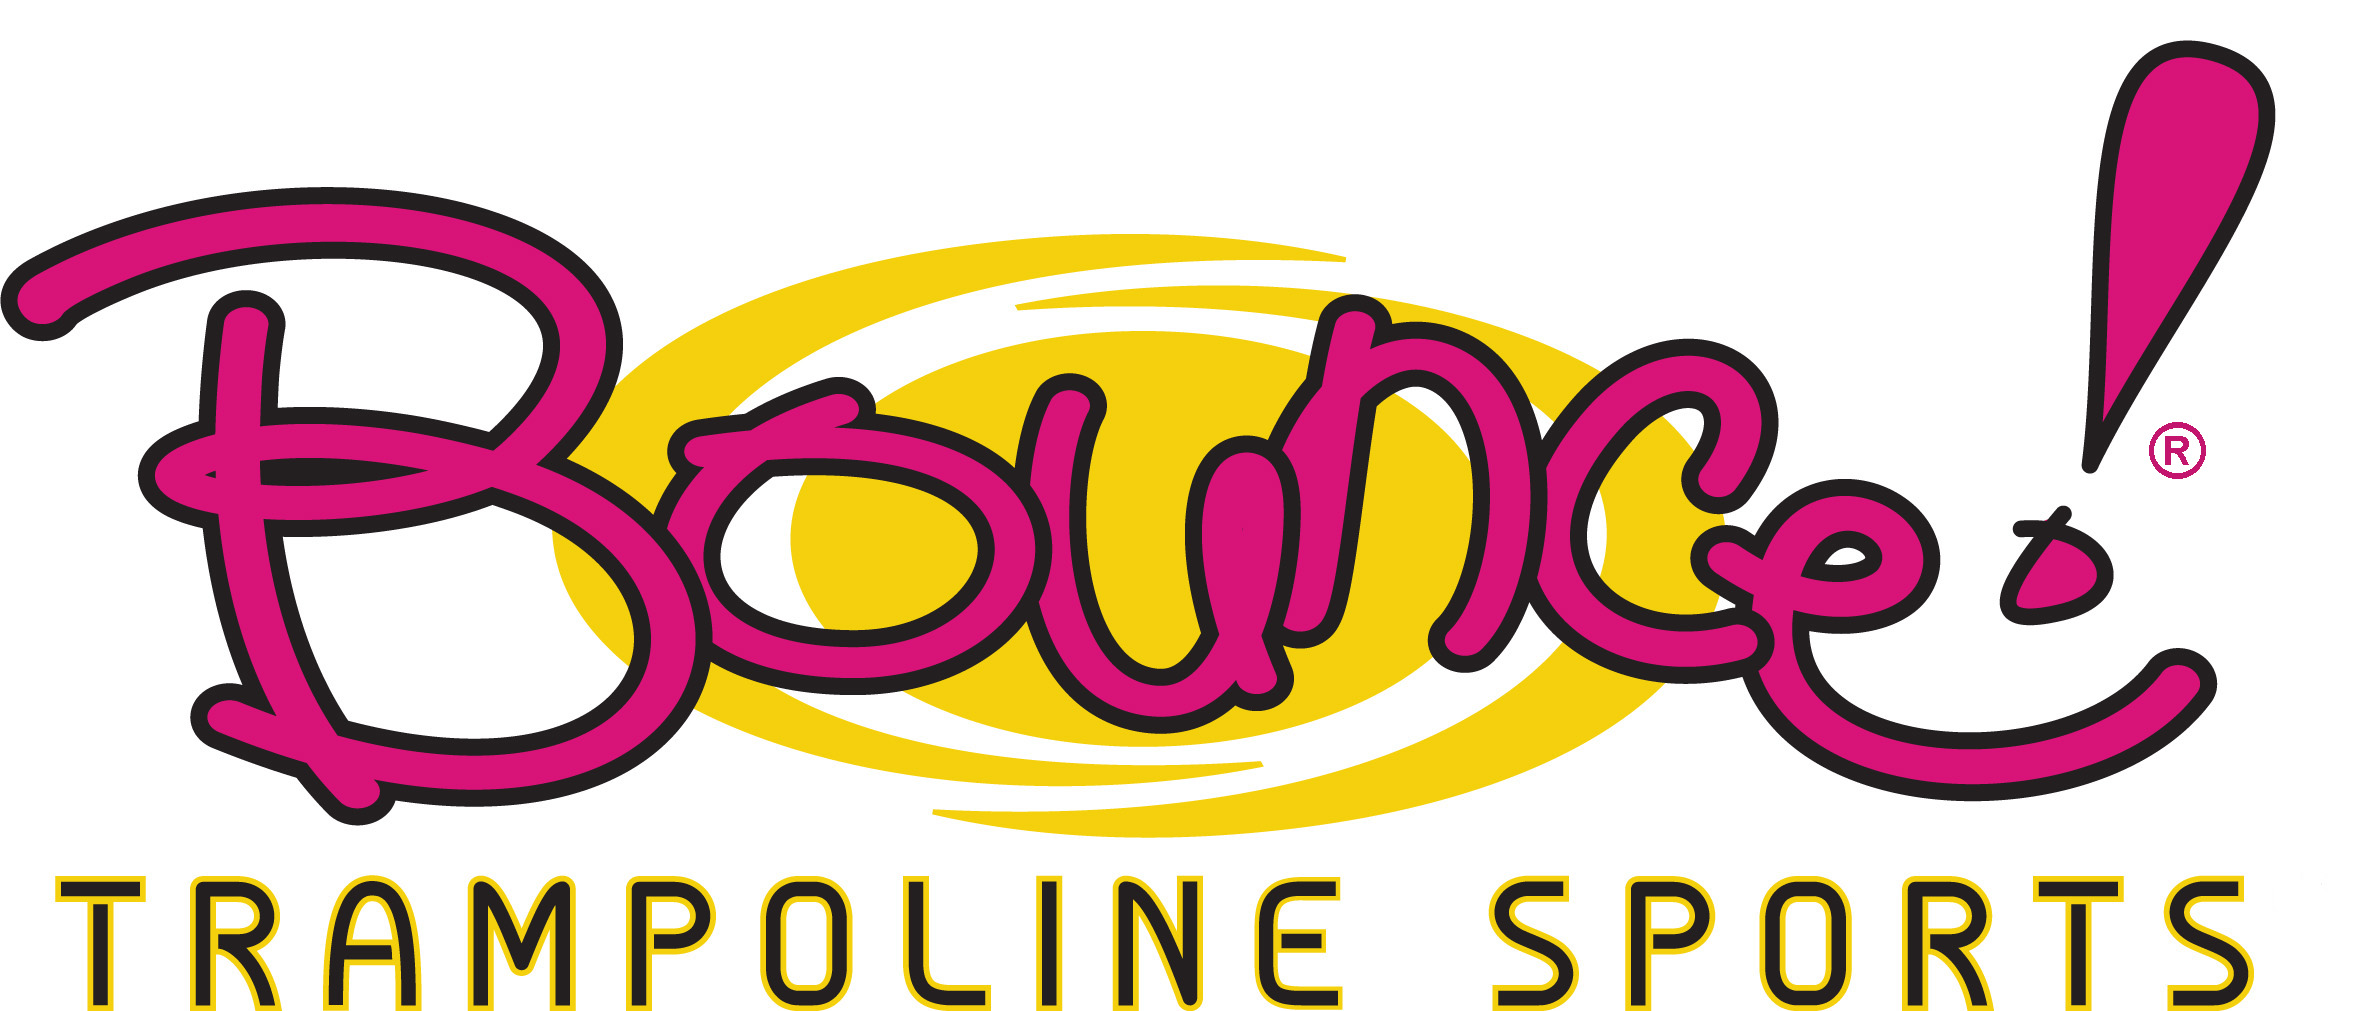 Bounce! Trampoline Sports has 3 locations